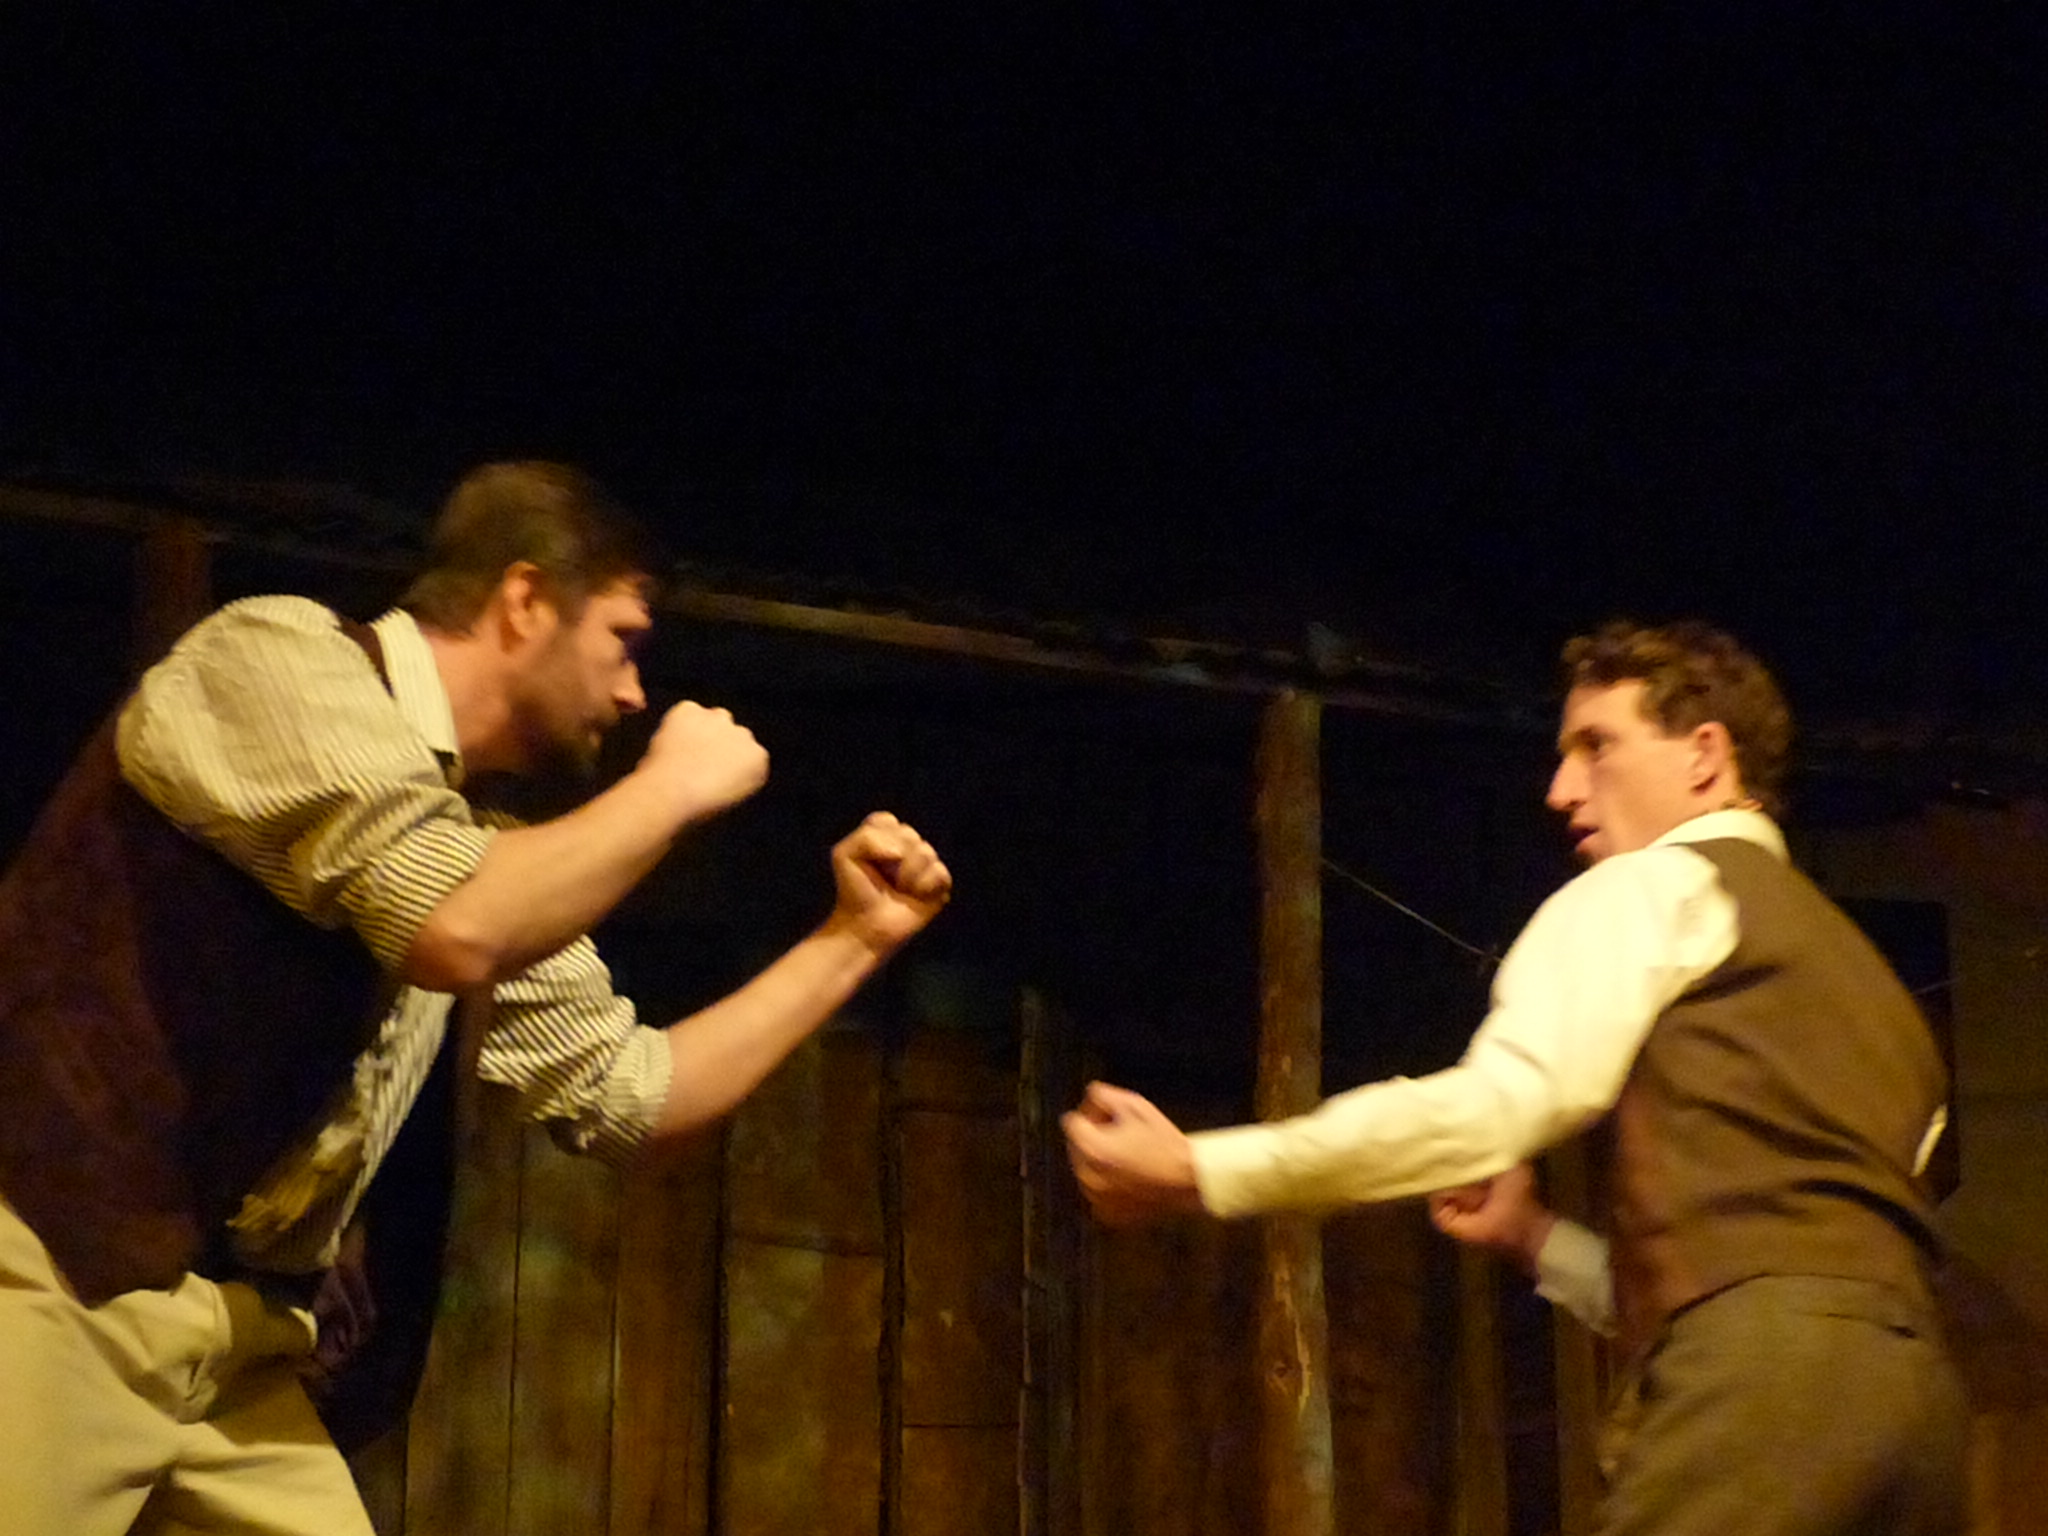 two men fighting over soing on a stage